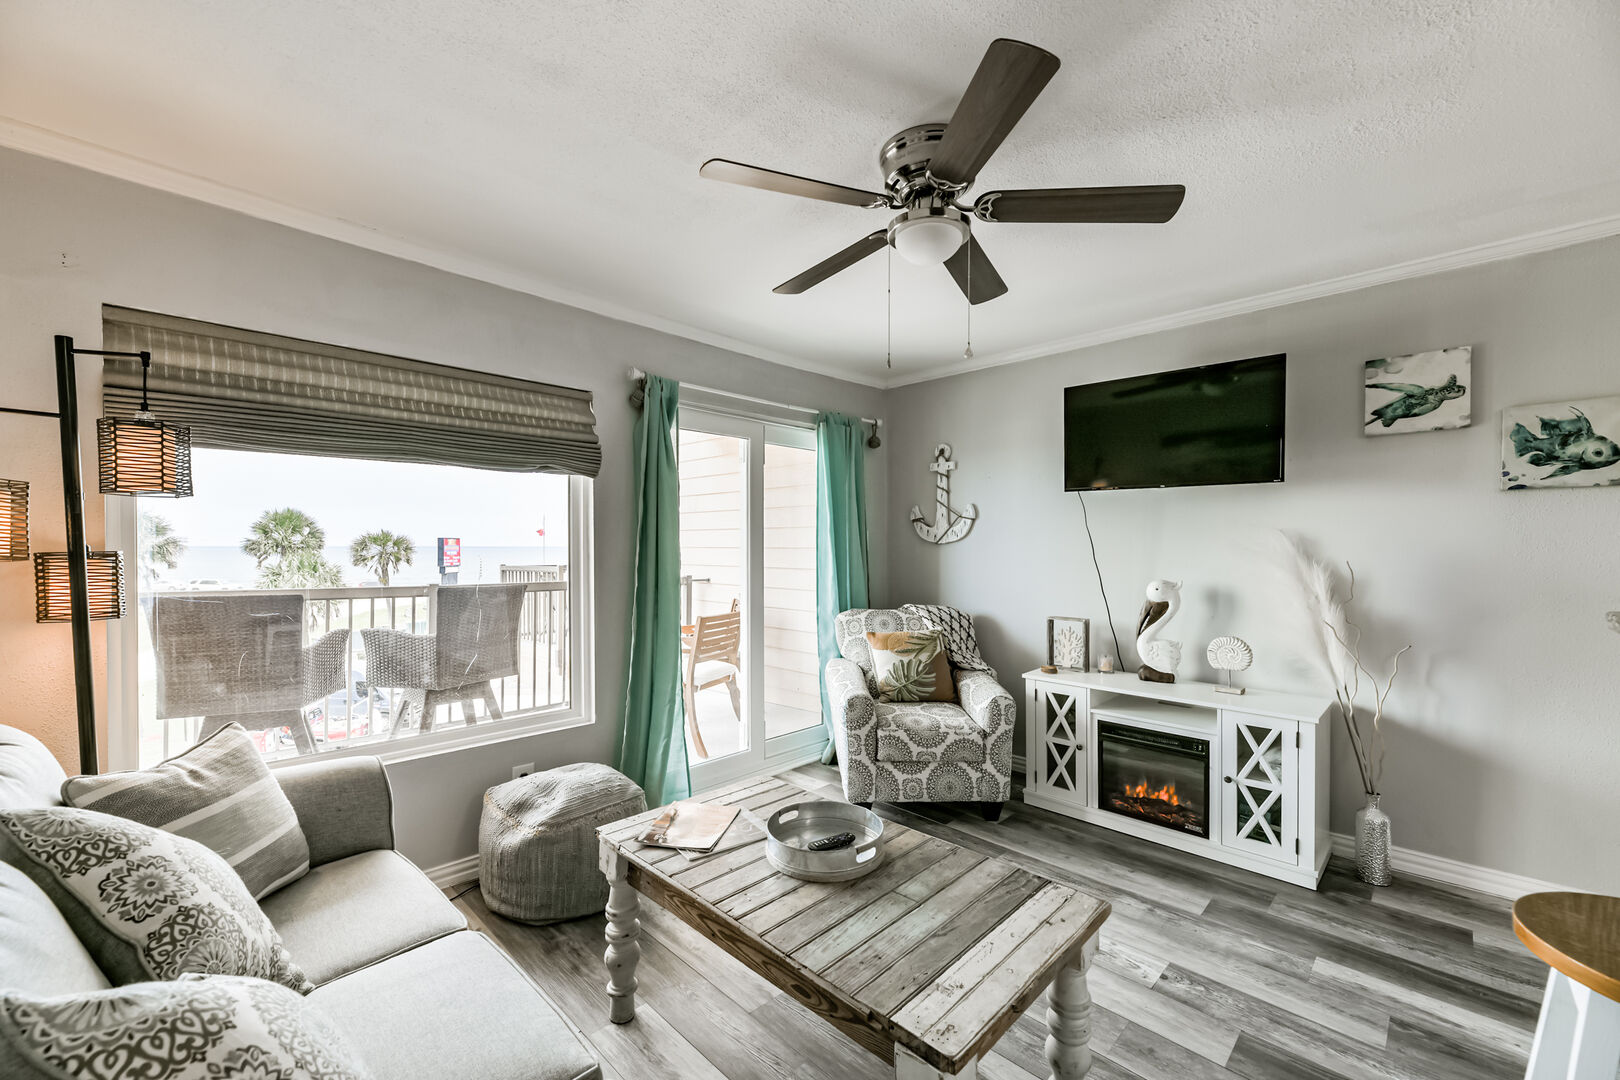 ENJOY COMFY SEATING AND WALL MOUNTED TV AT THE END OF A LONG DAY AT THE BEACH